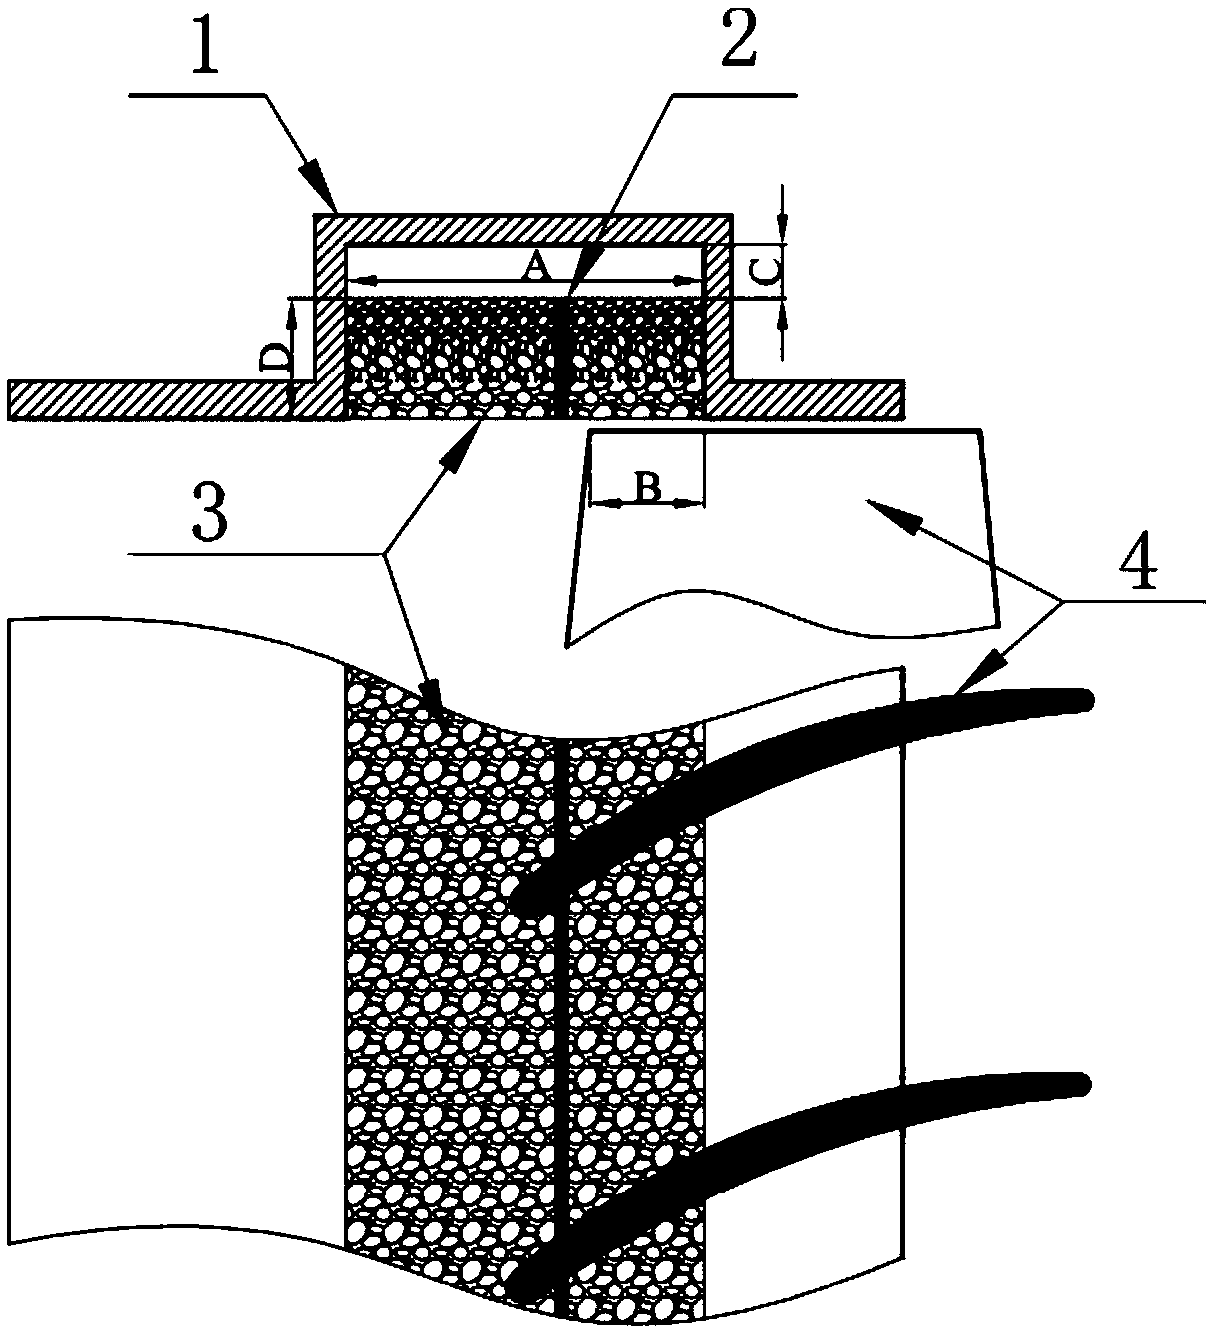 A compressor wall surface treatment device with functions of expanding stability and eliminating noise